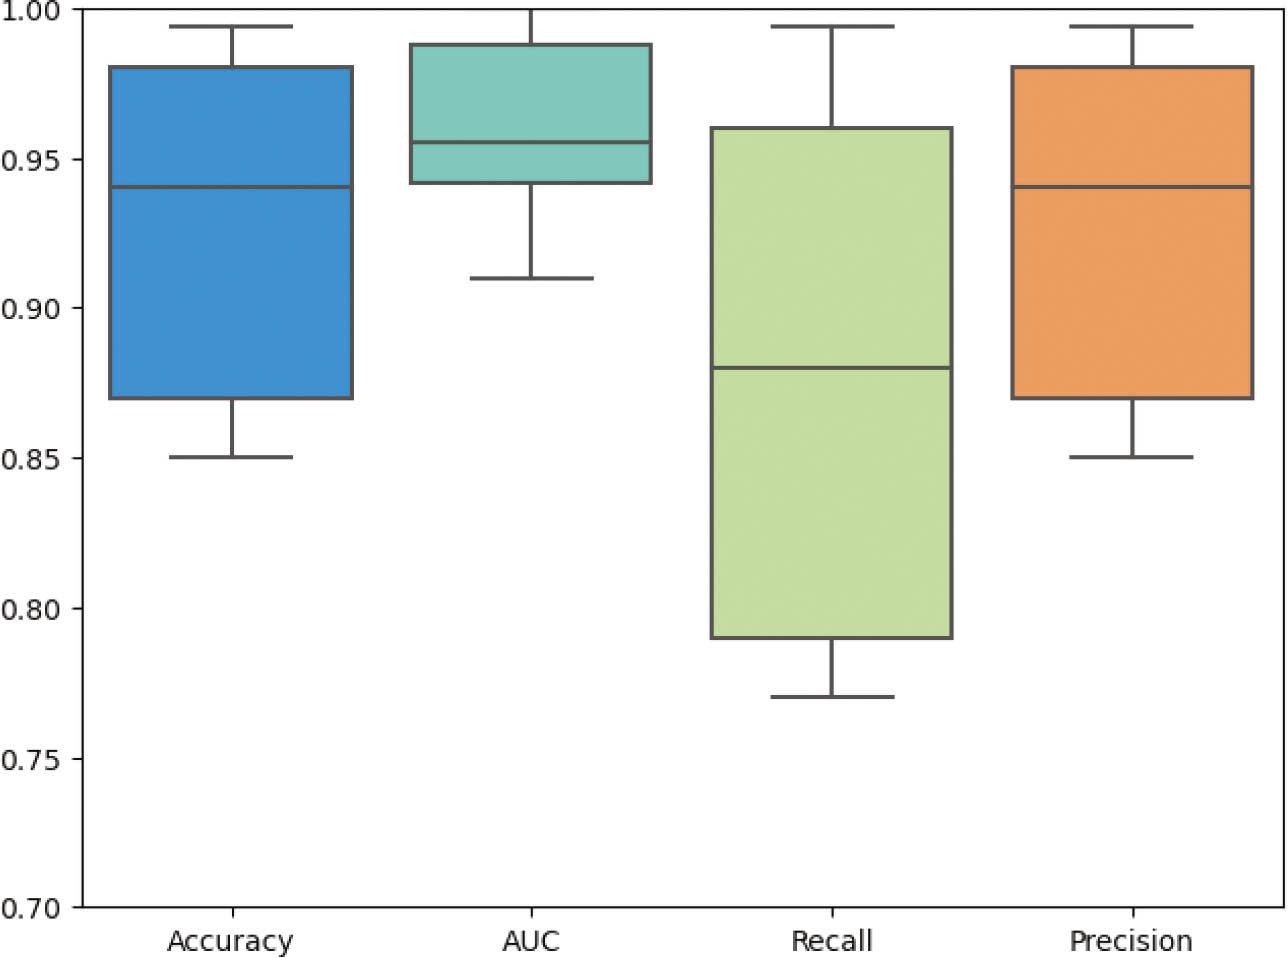 Box plot for Accuracy, AUC, recall and precision